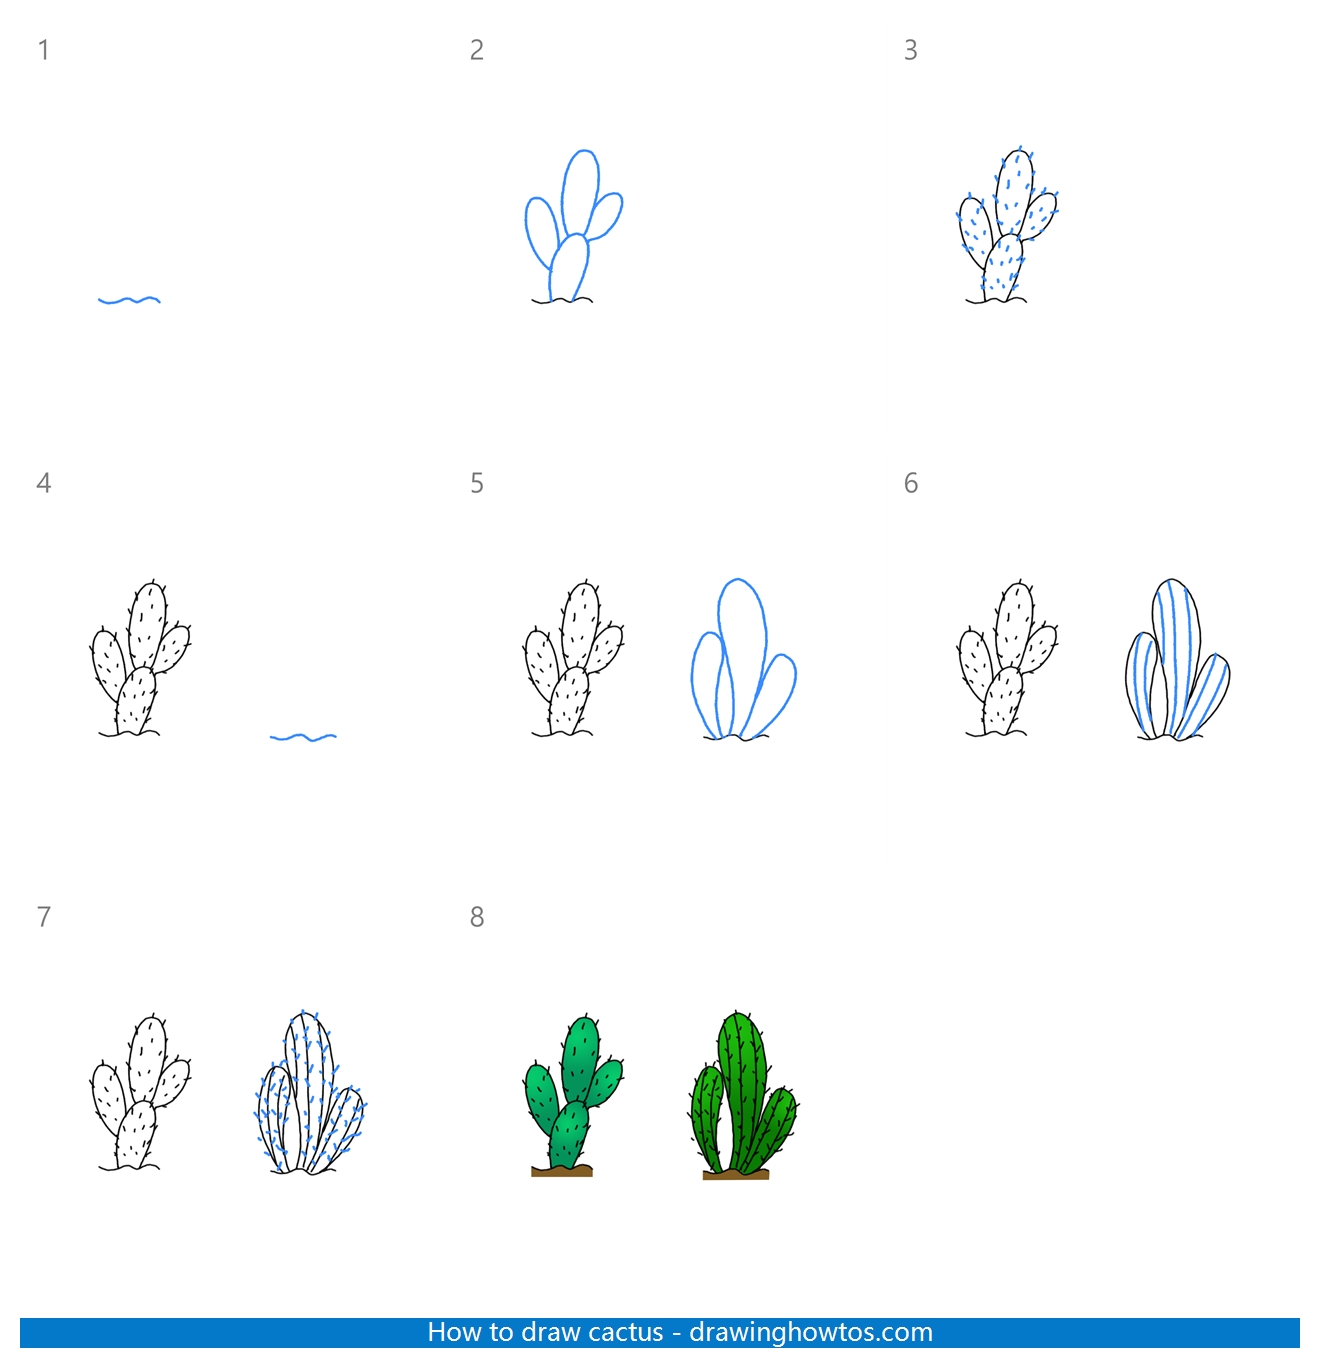 How to Draw Cactus Step by Step